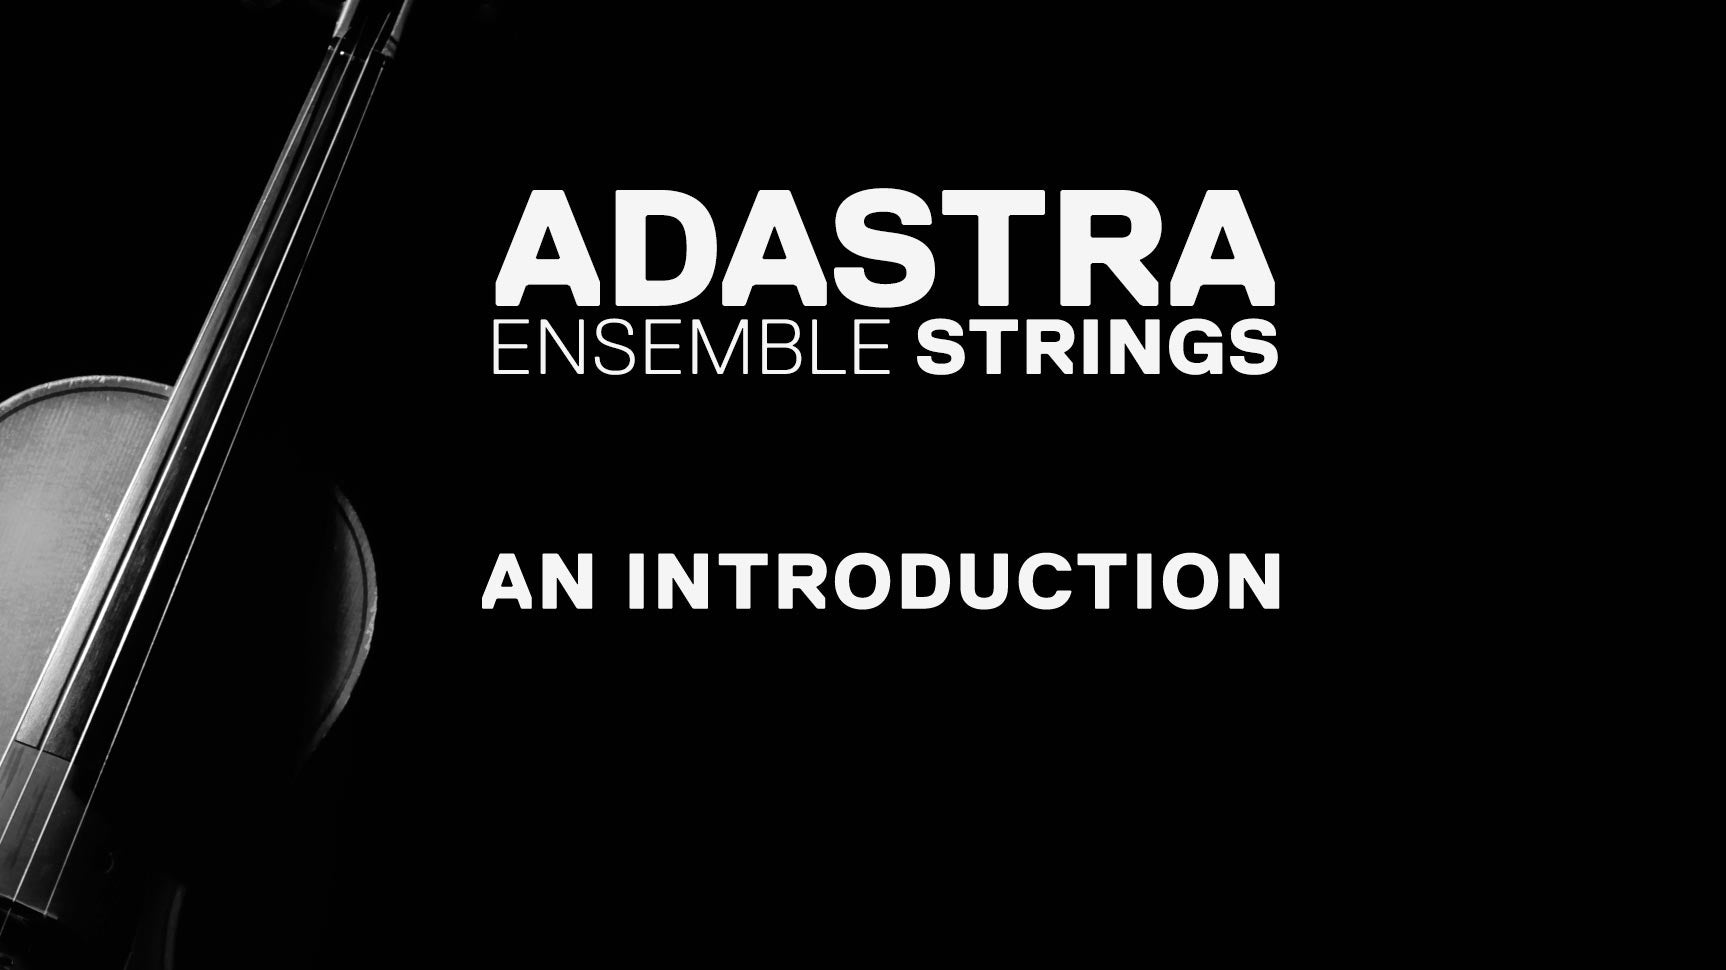 Adastra Solo Strings